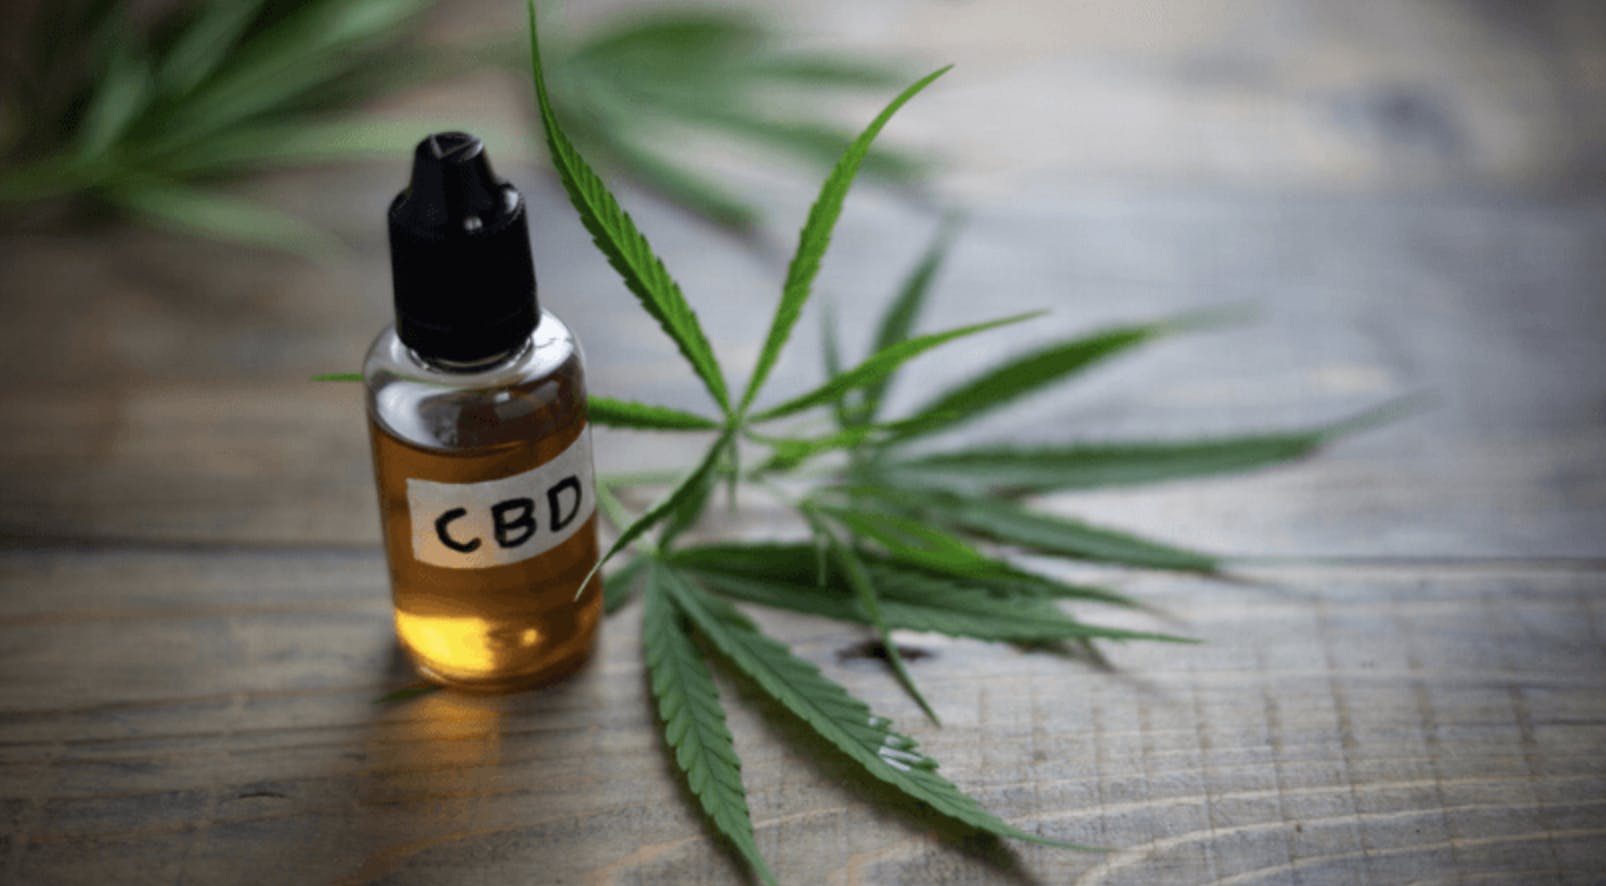 A bottle of CBD oil next to a cannabis leaf